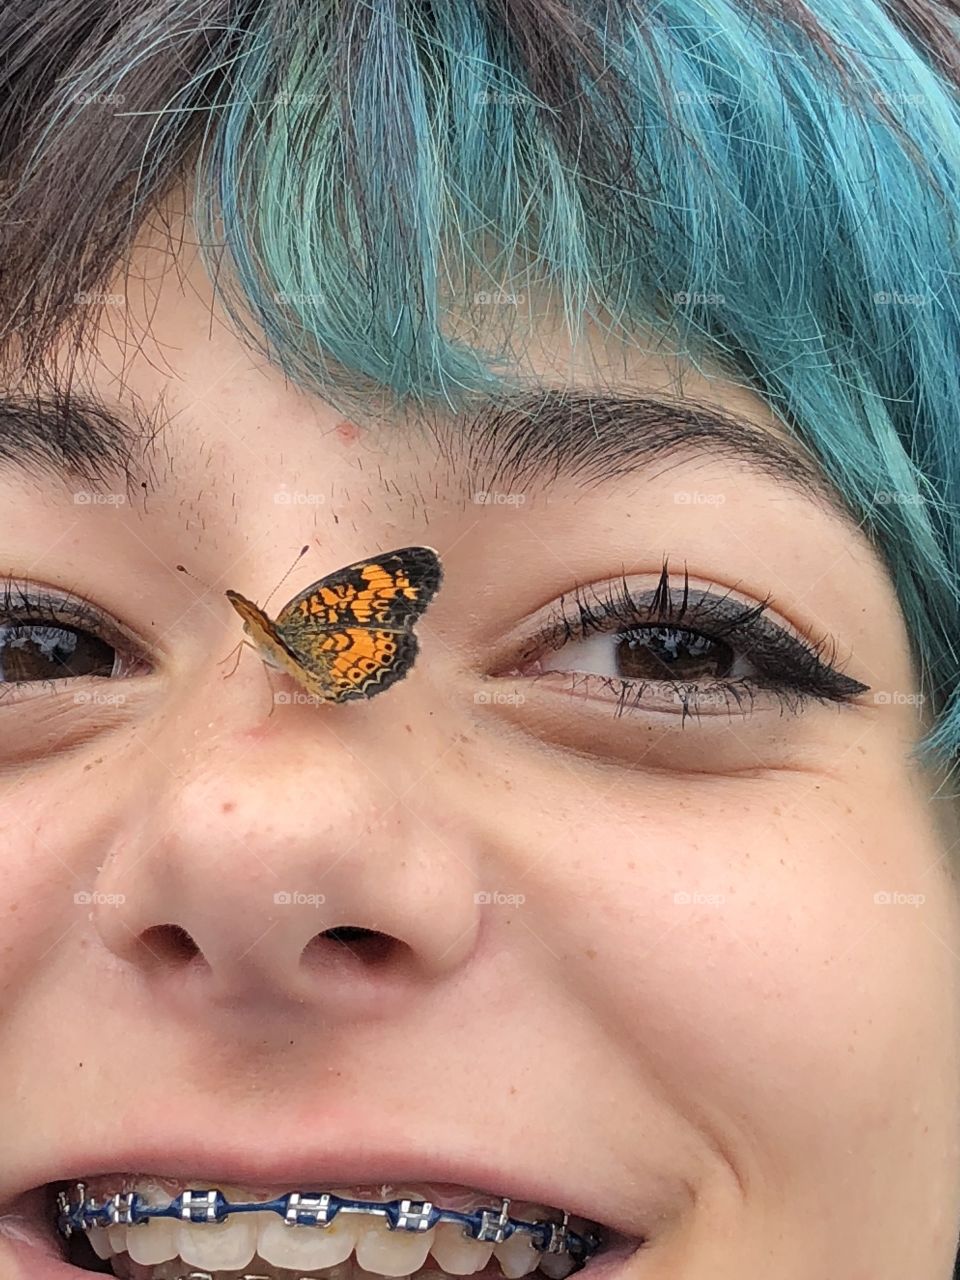 Tiny butterfly landed on her nose happy and amazing 